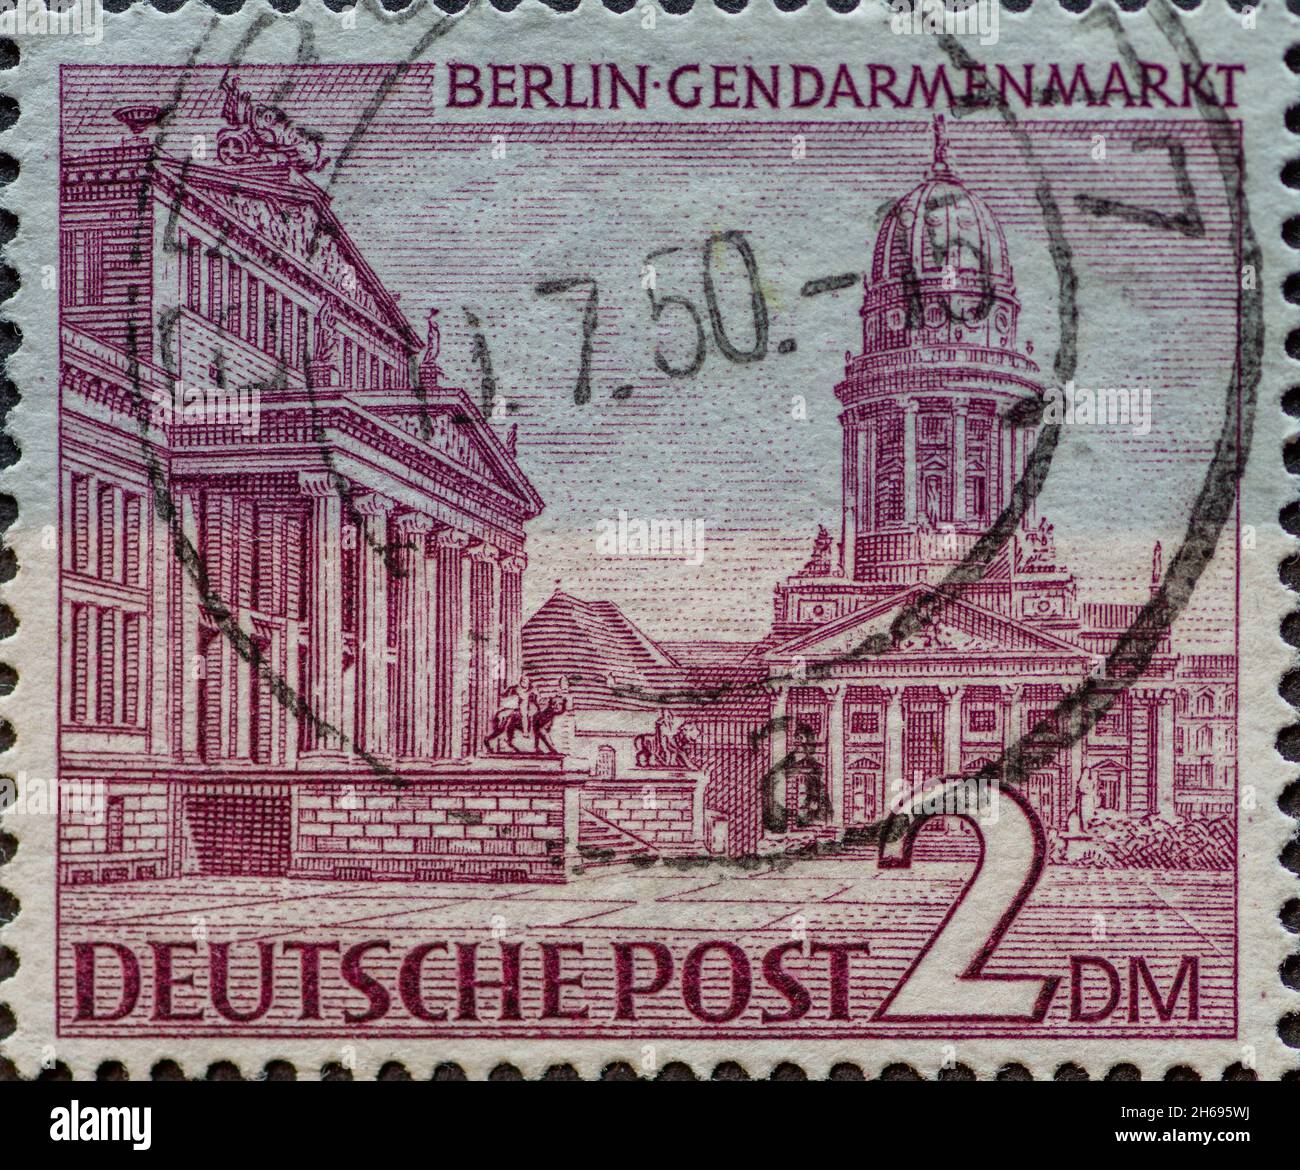 GERMANY, Berlin - CIRCA 1949: a postage stamp from Germany, Berlin showing Berlin buildings: Berlin Gendarmen market in purple Stock Photo